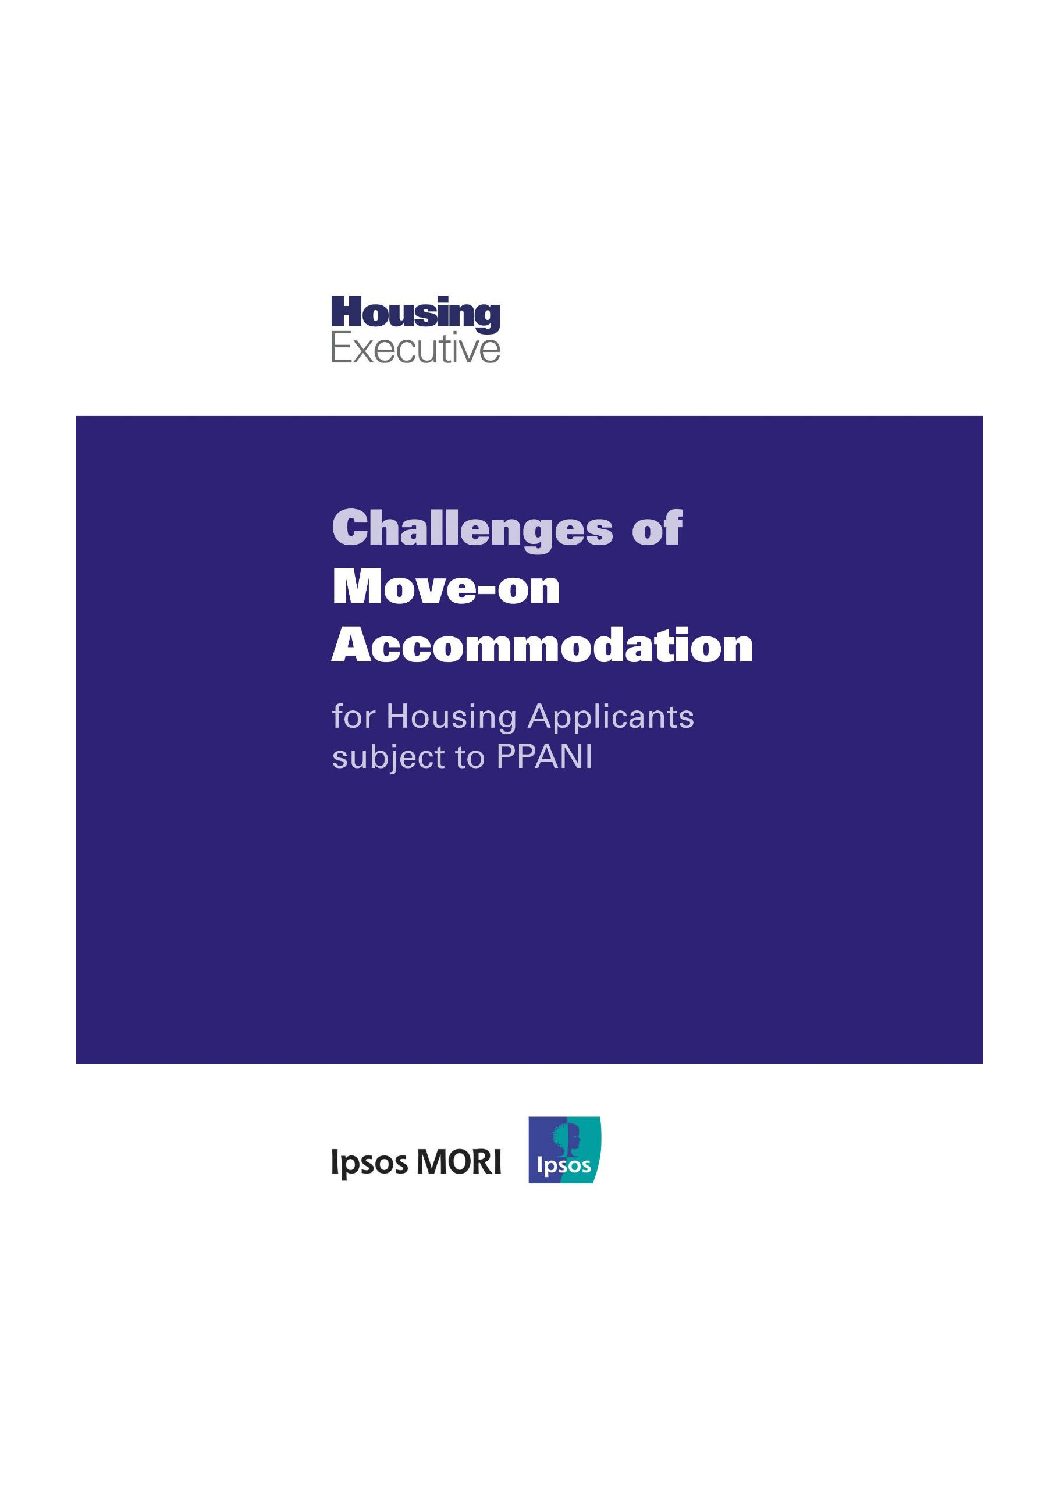 Challenges of Move-on Accommodation for Housing Applicants applicable to PPANI